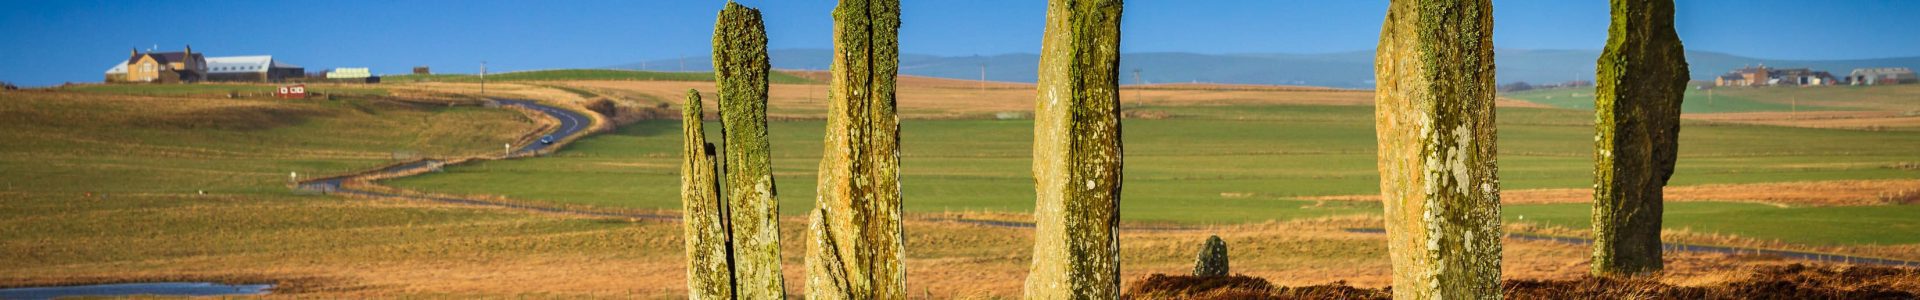 The Ring of Brodgar neolithic stone circle, Mainland, Orkney OR032